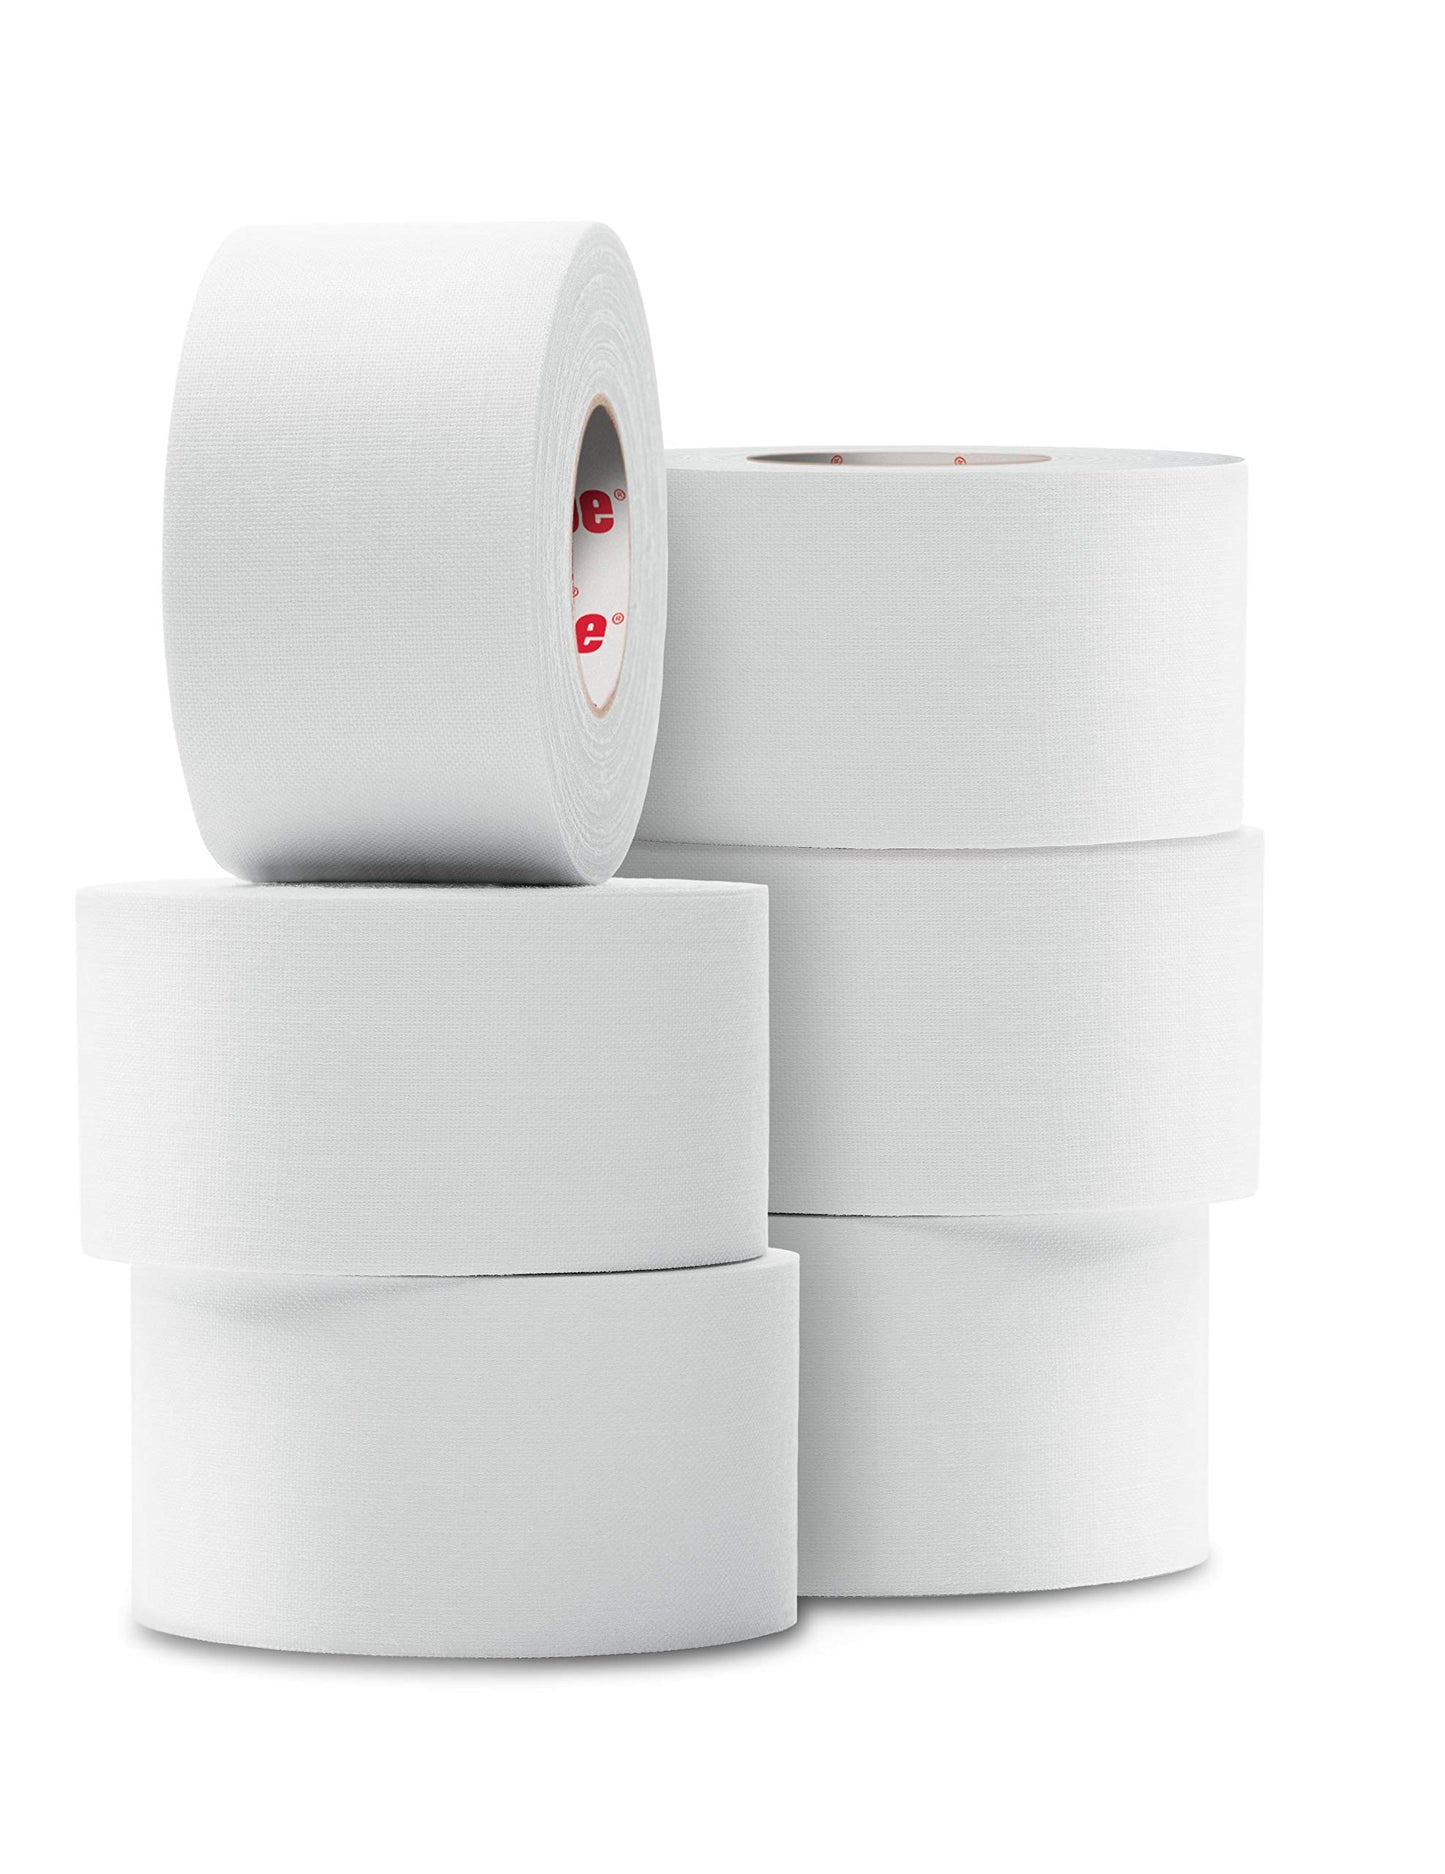 MUELLER Sports Medicine To Go Athletic Tape, Adhesive for Sports and Home Use, White, 1.5" x 10yd Roll, 6 Count